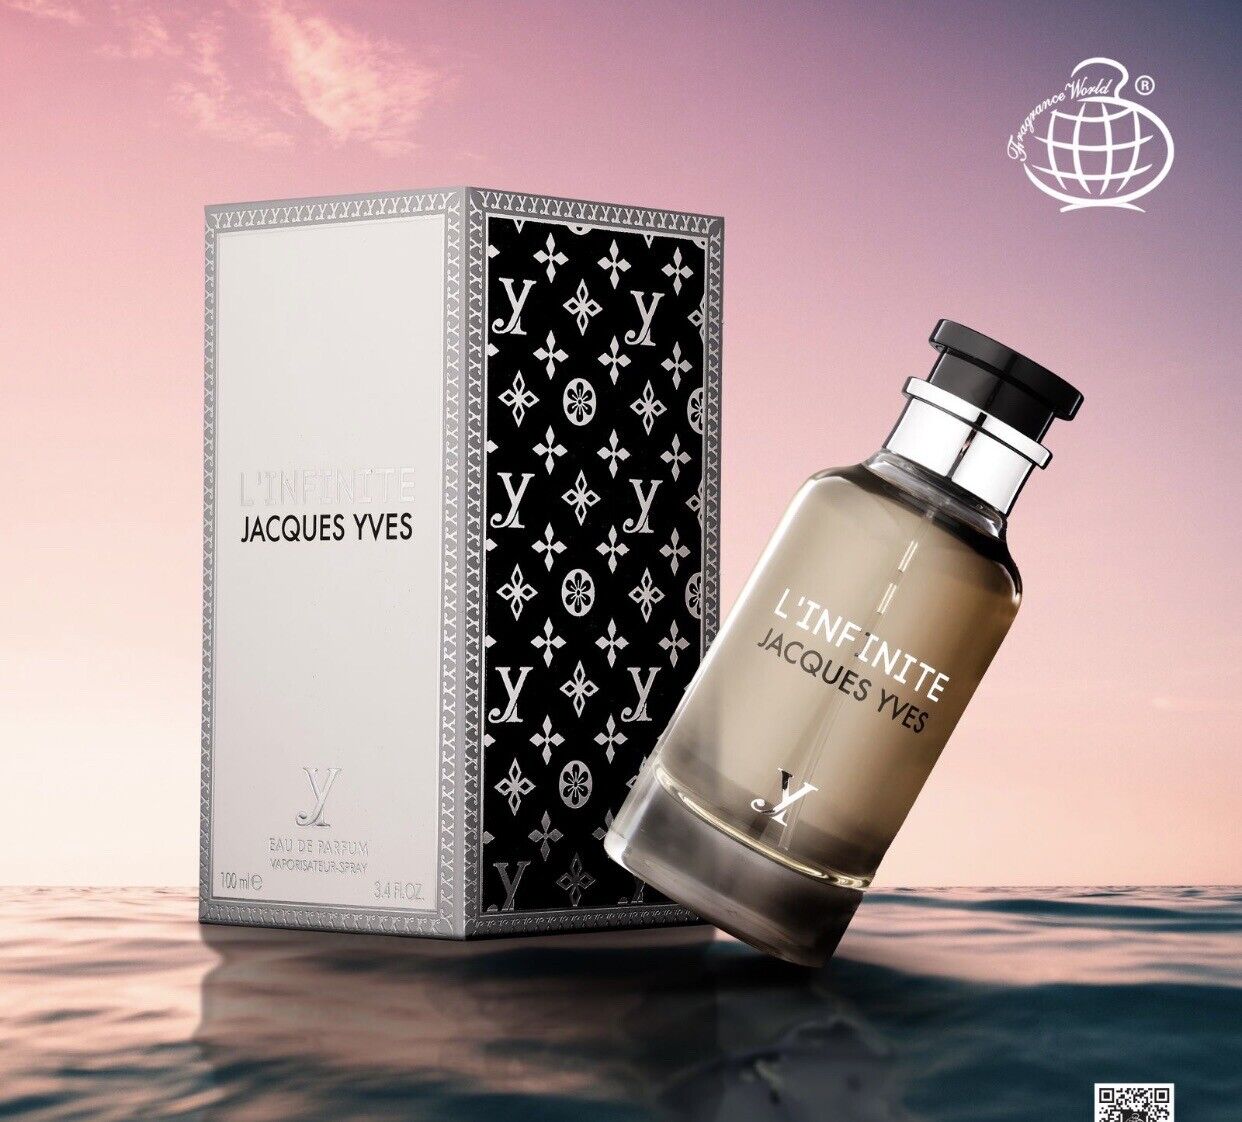 L'infinite Jacques Yves EDP Perfum By Fragrance World 100 ML -Newest Release